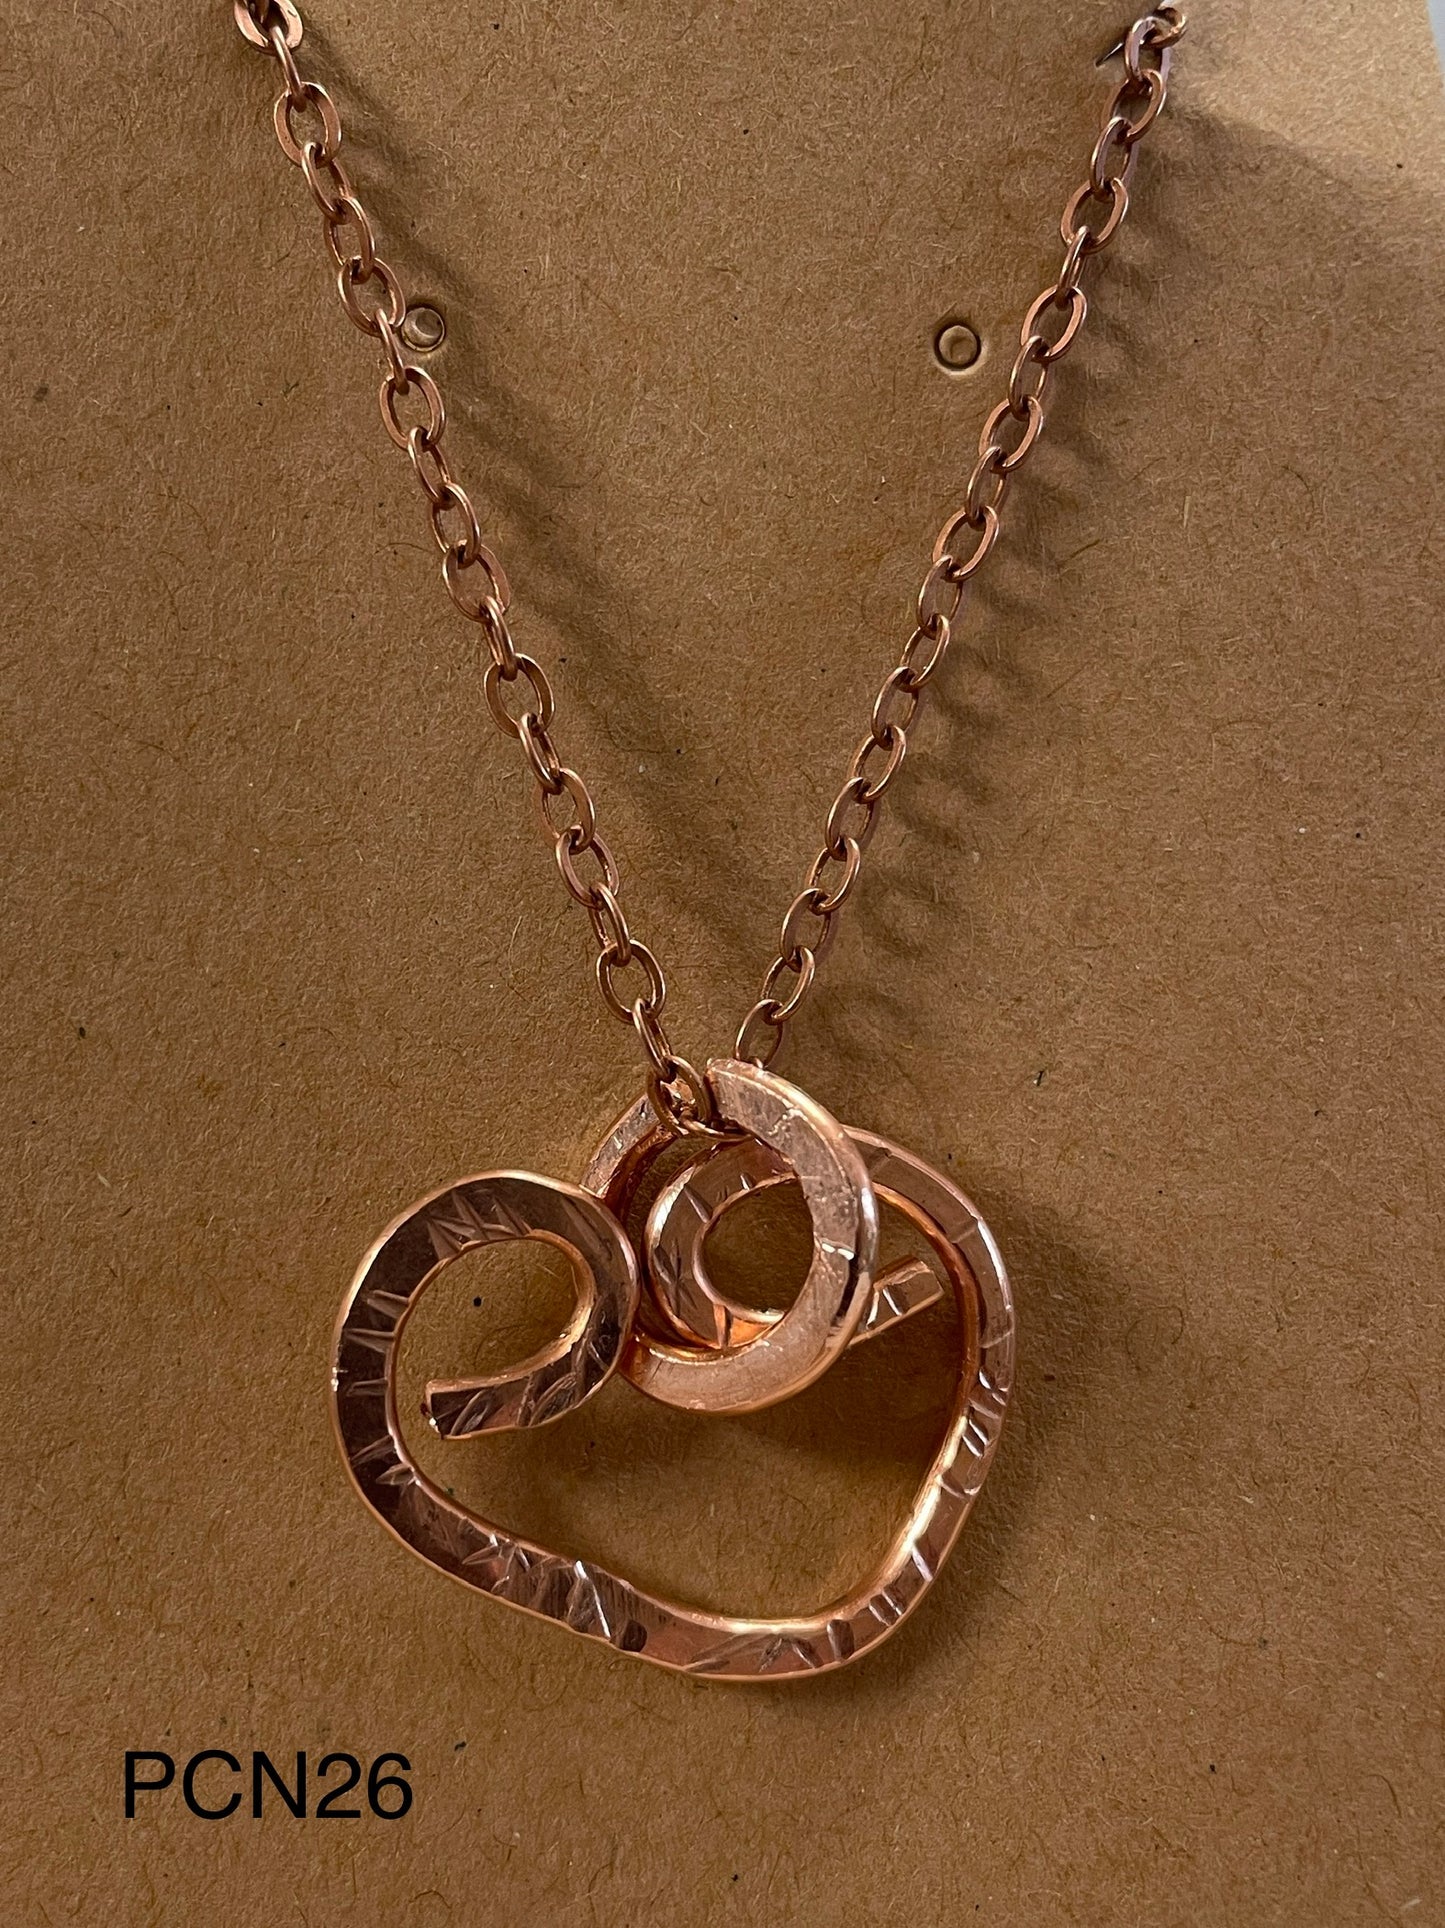 Textured Copper Heart & Copper Loop Necklace PCN26